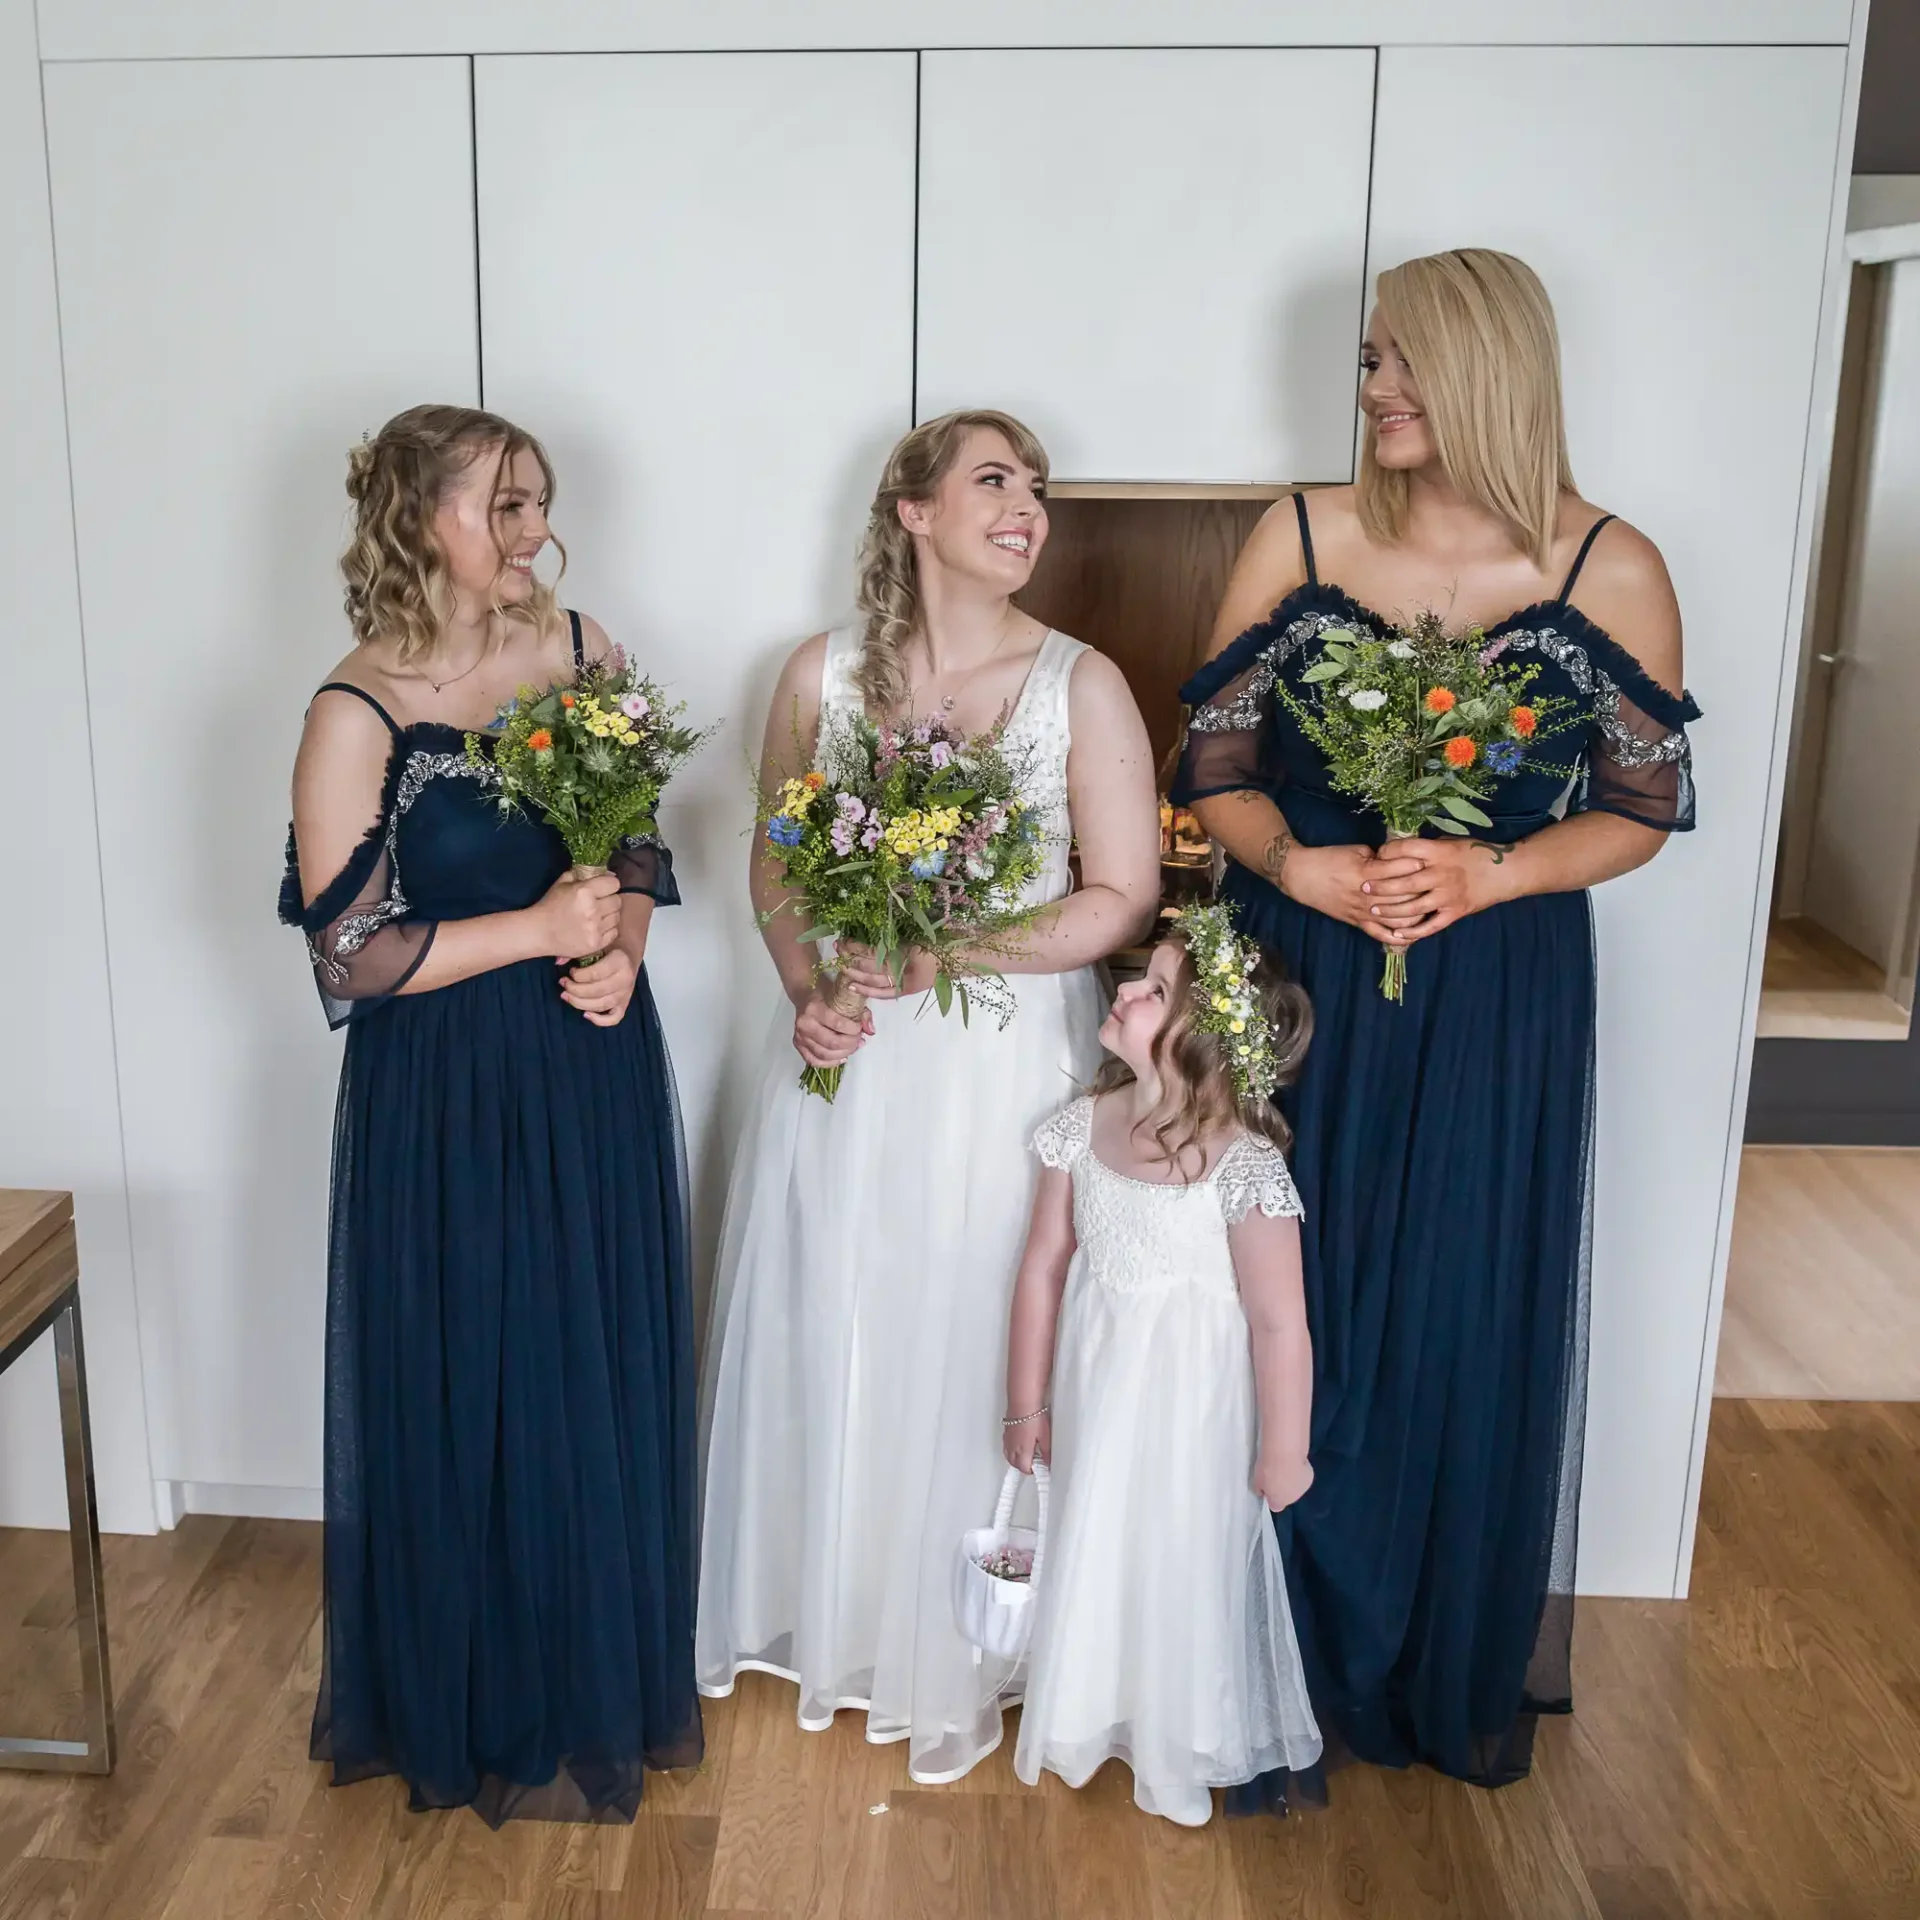 A bride in a white dress and three bridesmaids in navy dresses hold bouquets in a room, smiling and looking at each other.